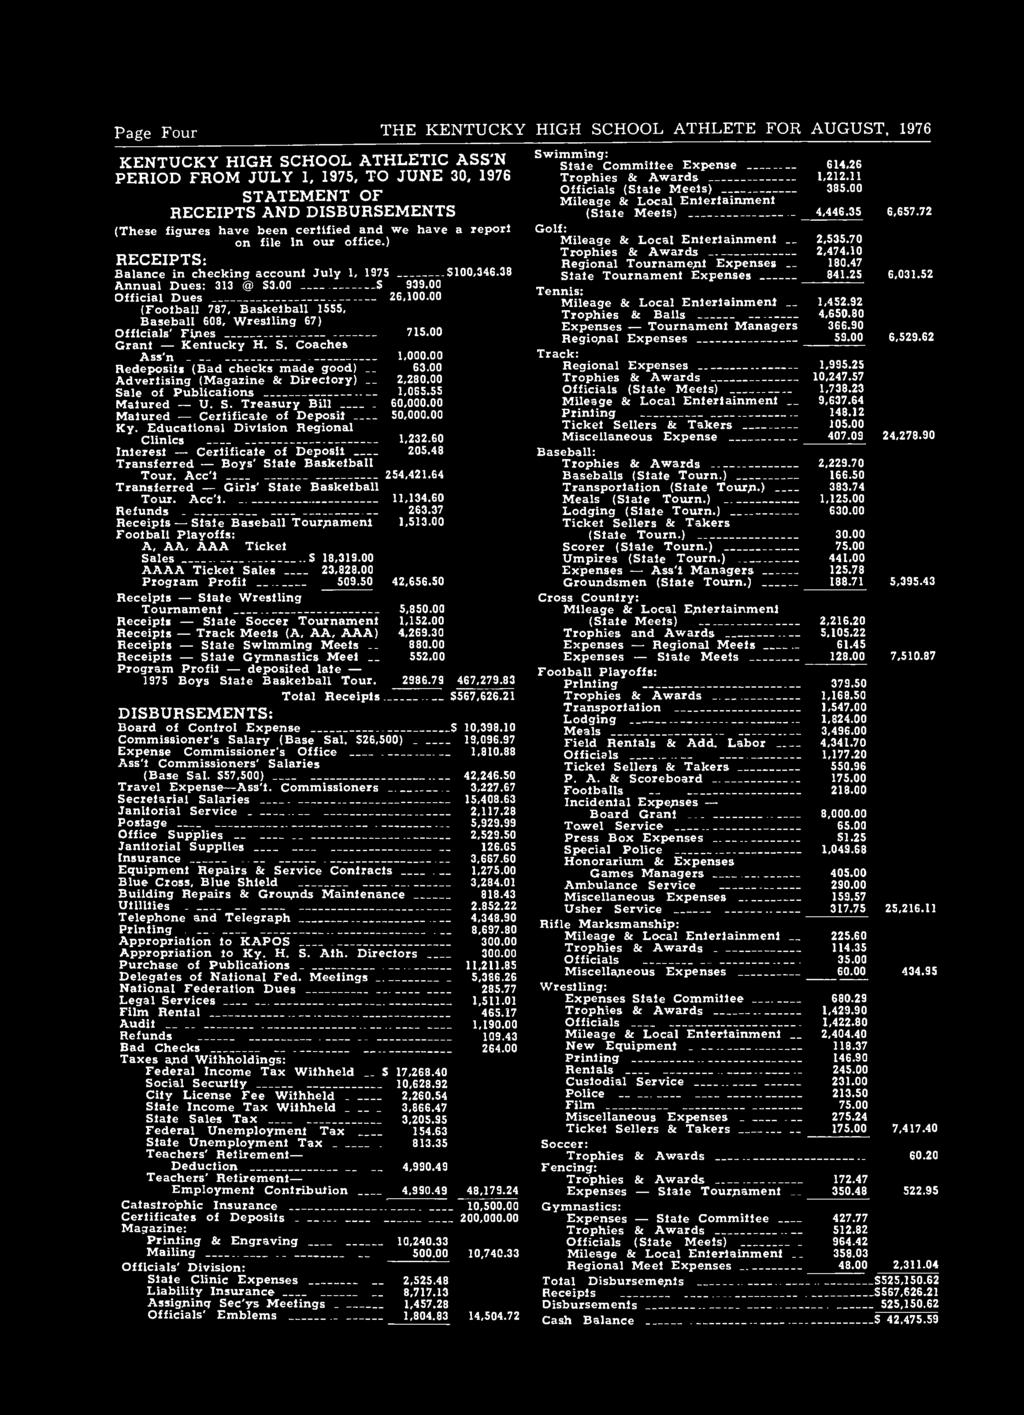 ) RECEIPTS: Balance in checking account July 1, 1975 5100,346.38 Annual Dues: 313 @ $3.00 S 939.00 Official Dues 26,100.